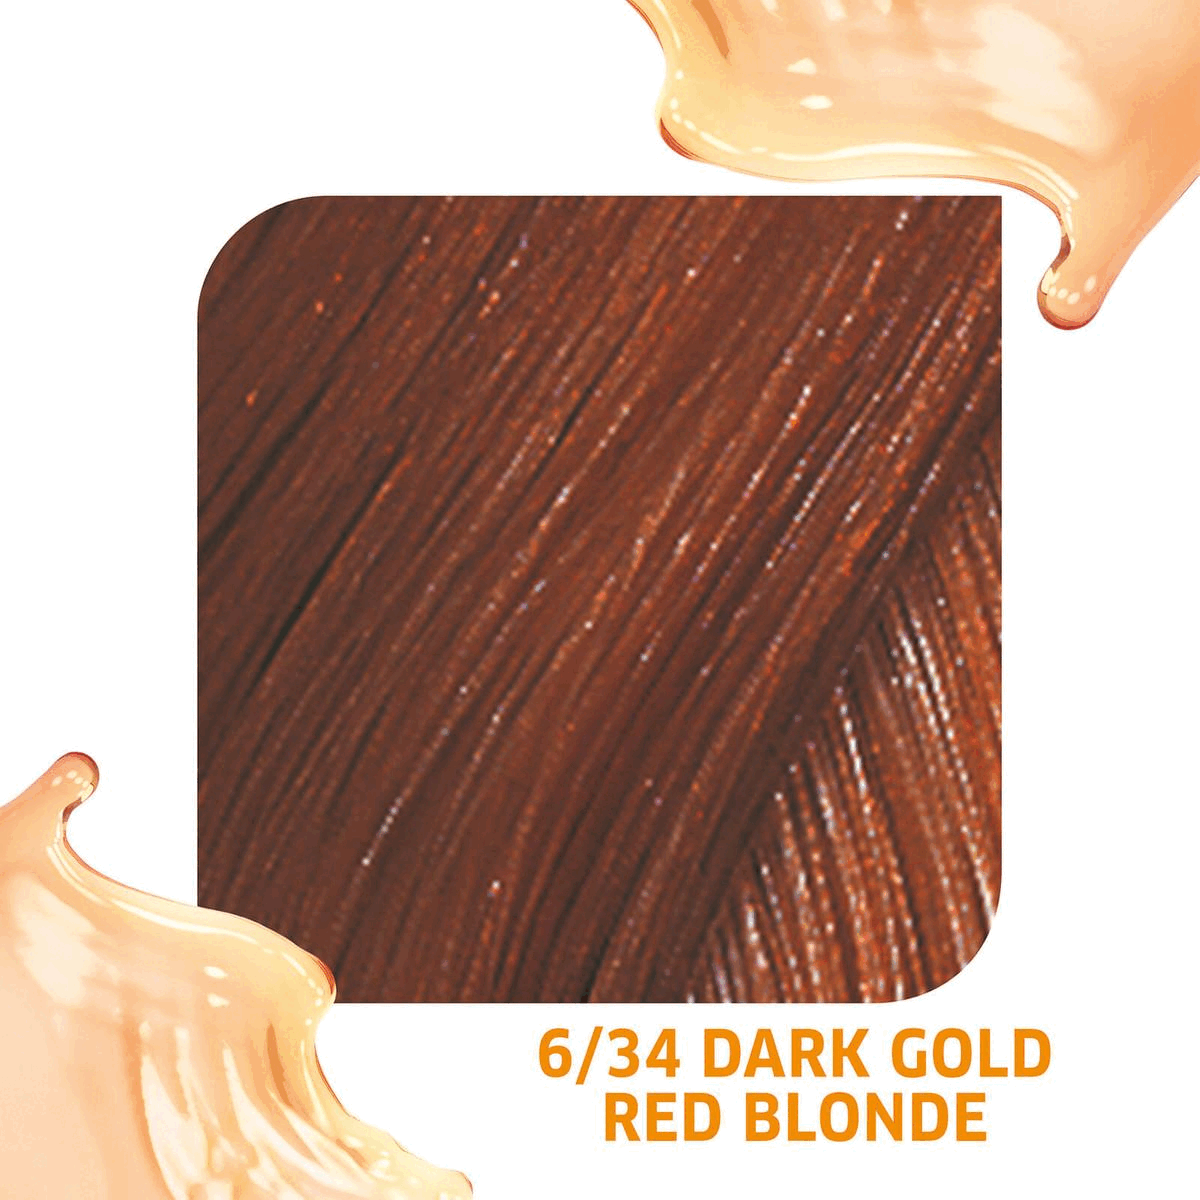 6/34 Dark Gold Red Blonde Semi-Permenant Colour enhance. Direct Dies and Vitamin Care Complex. Lasts Up to 10 Shampoos. Colour, depth and tone. Quick and Easy Application  